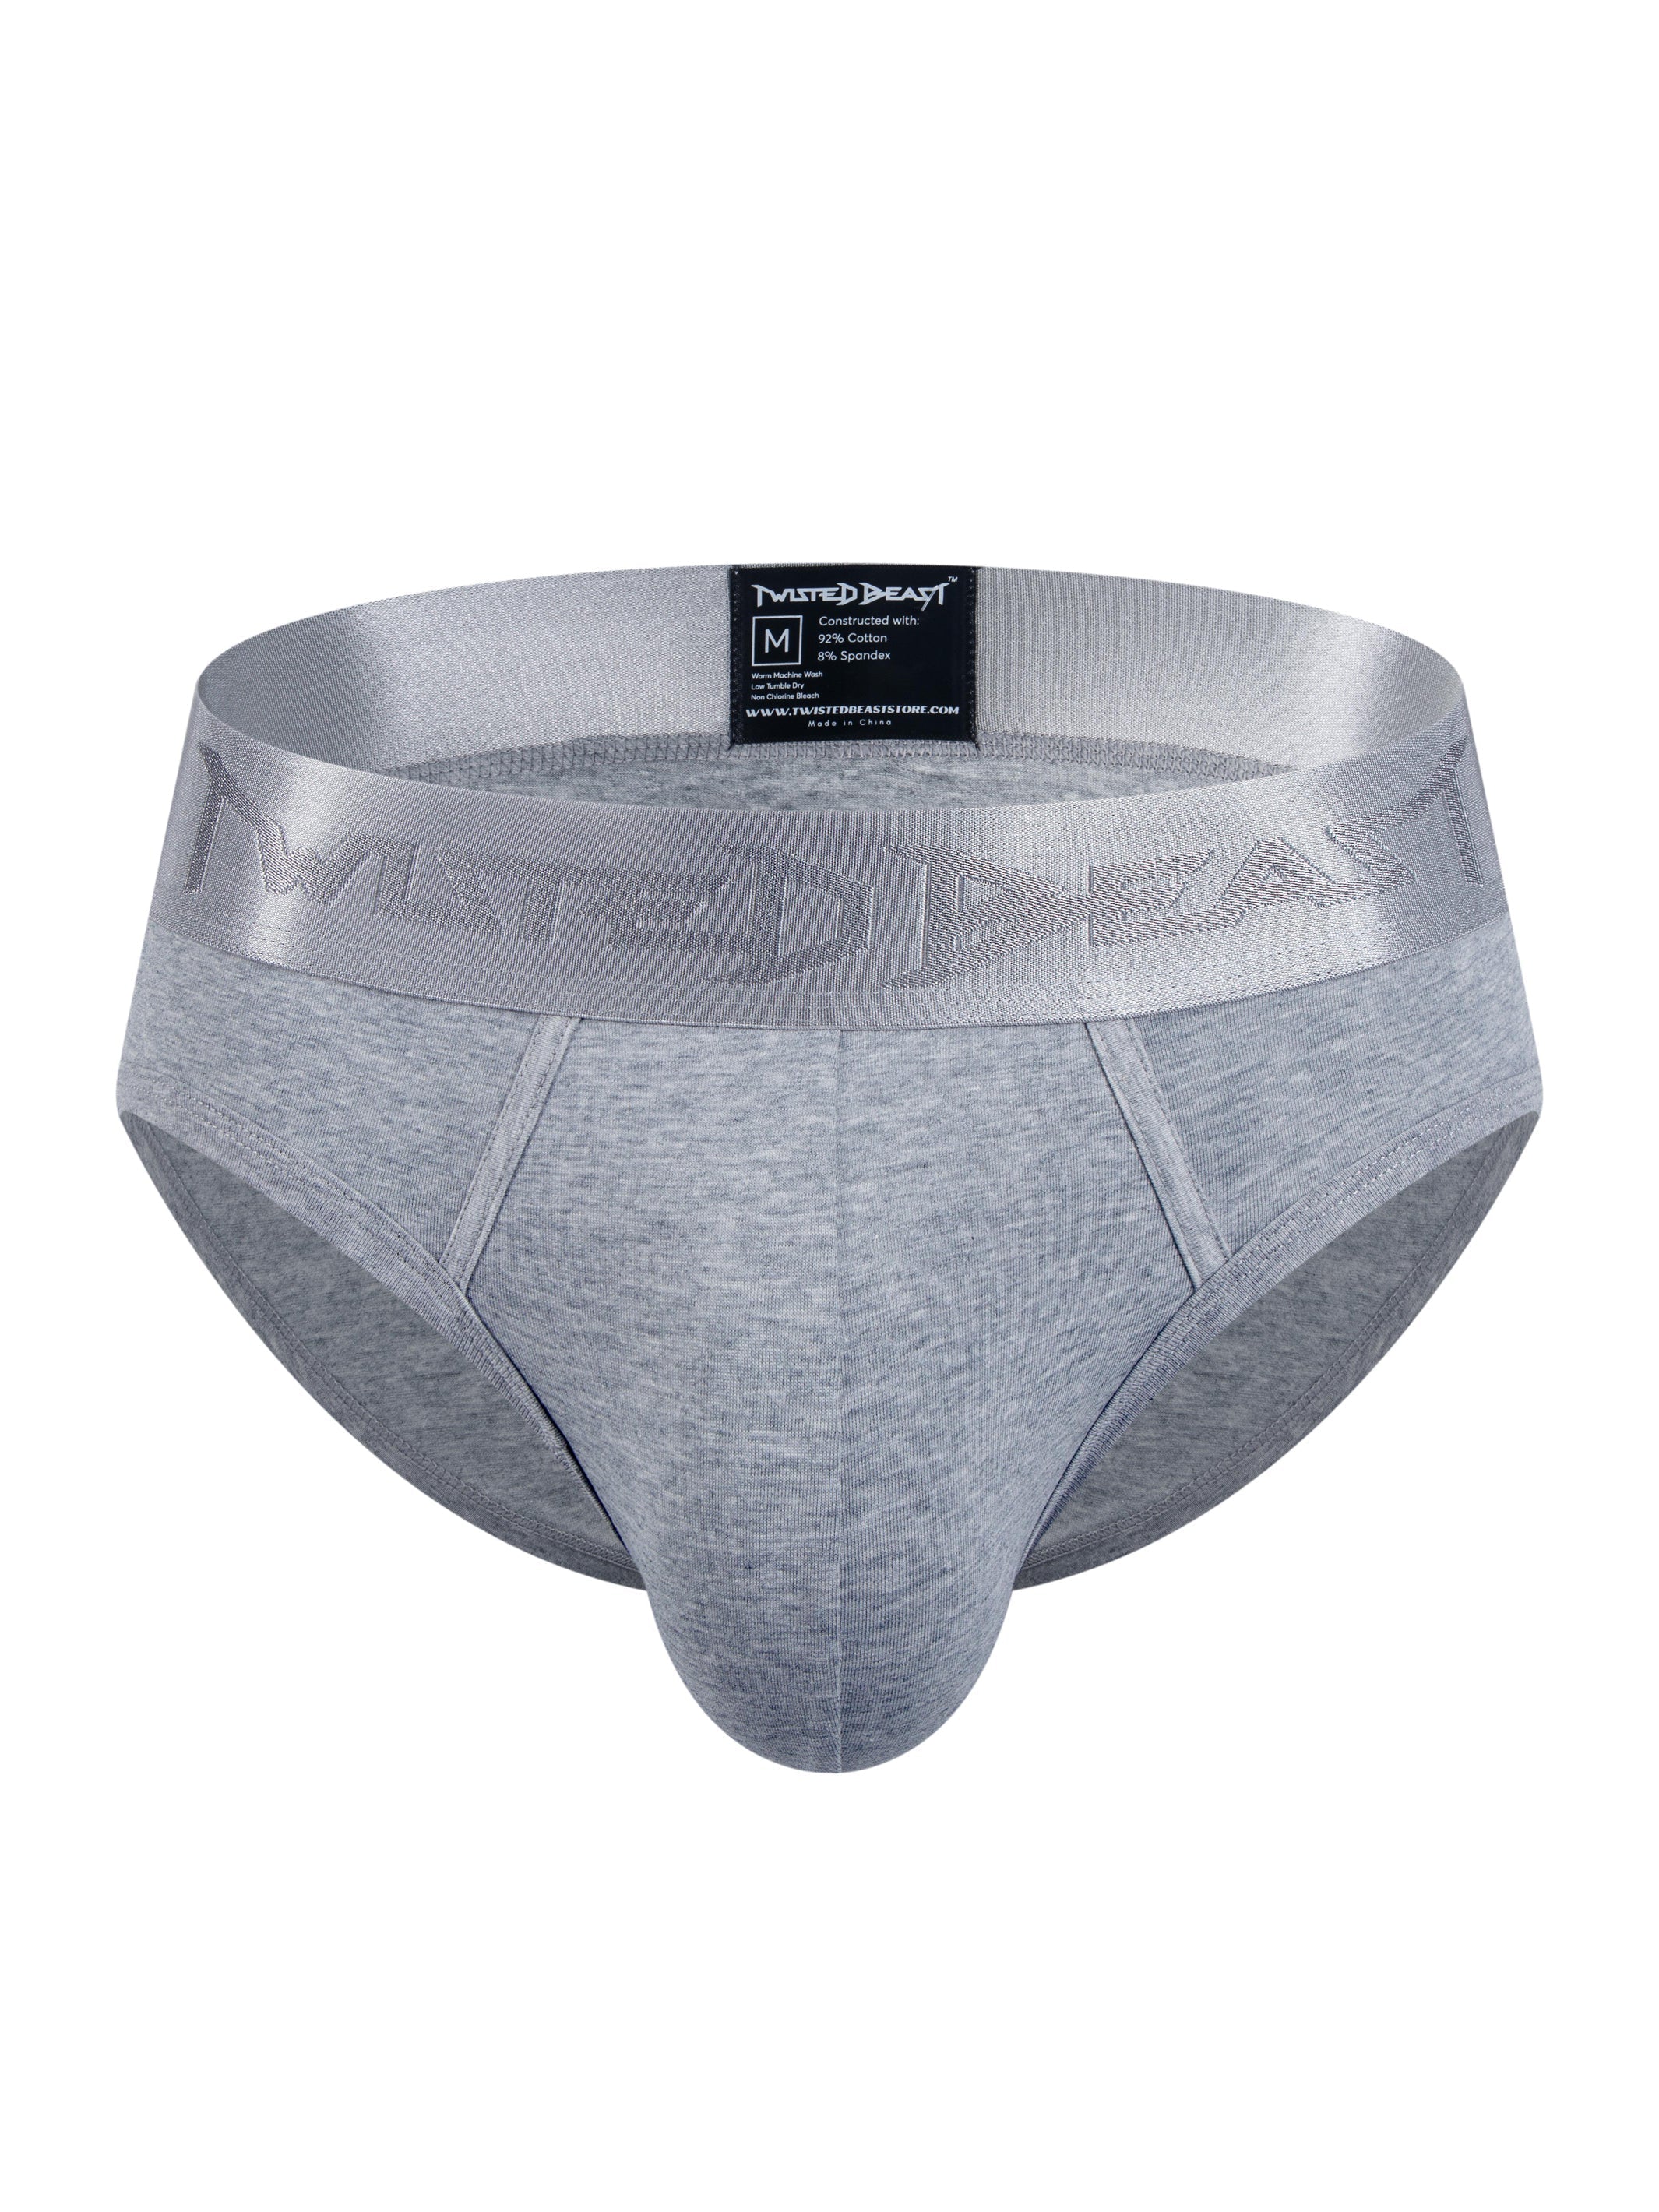 A front facing photo of a pair of Phantom Briefs in grey, by Twisted Beast.